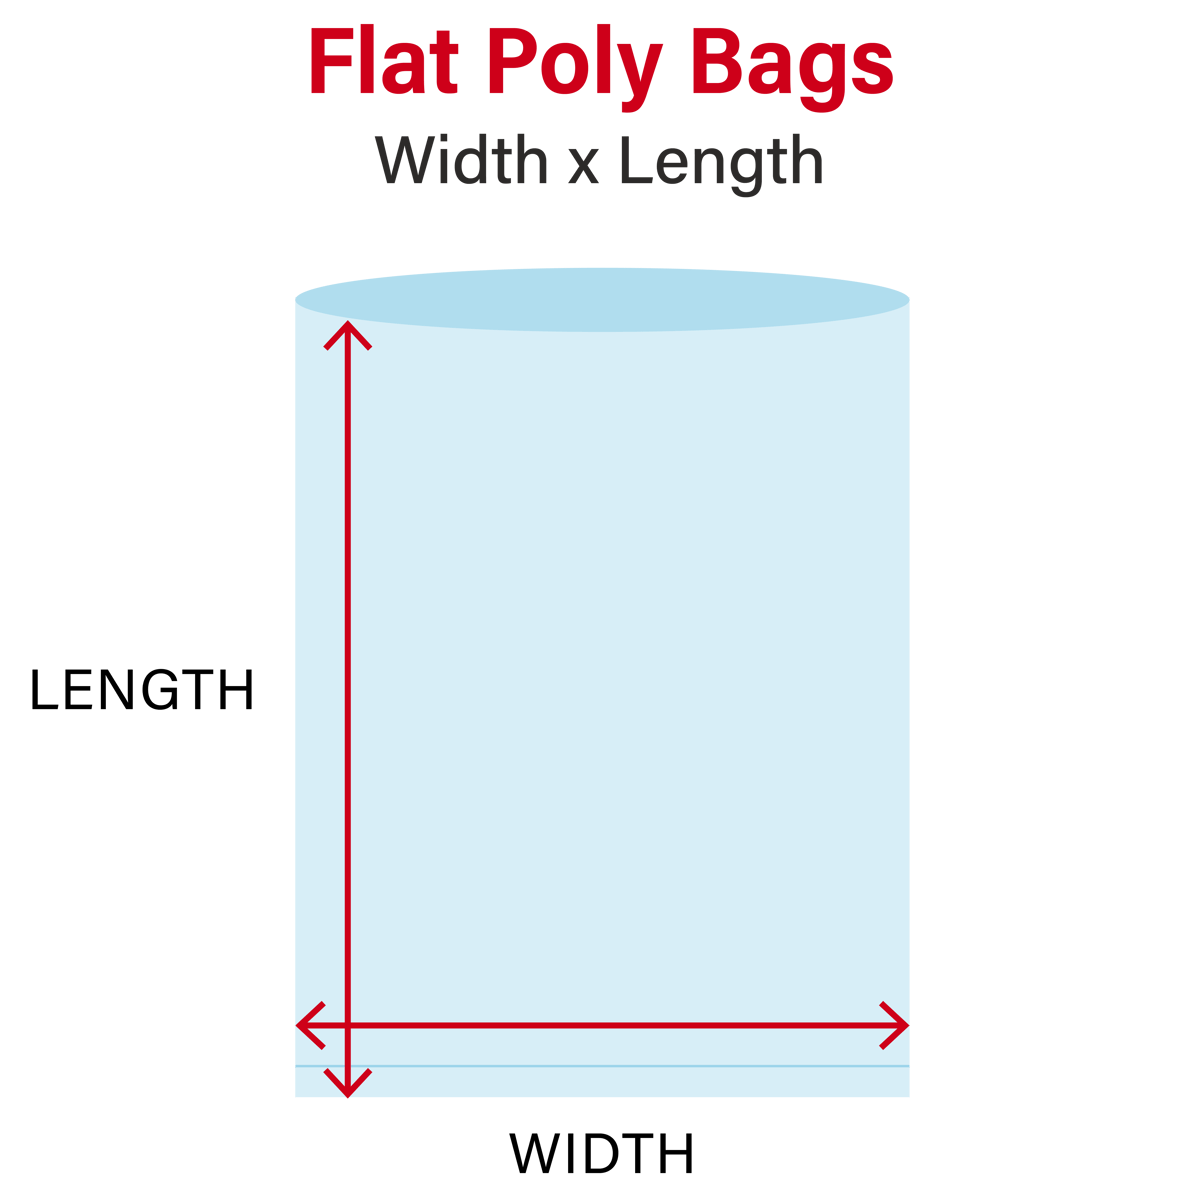 How To Measure Flat Poly Bags